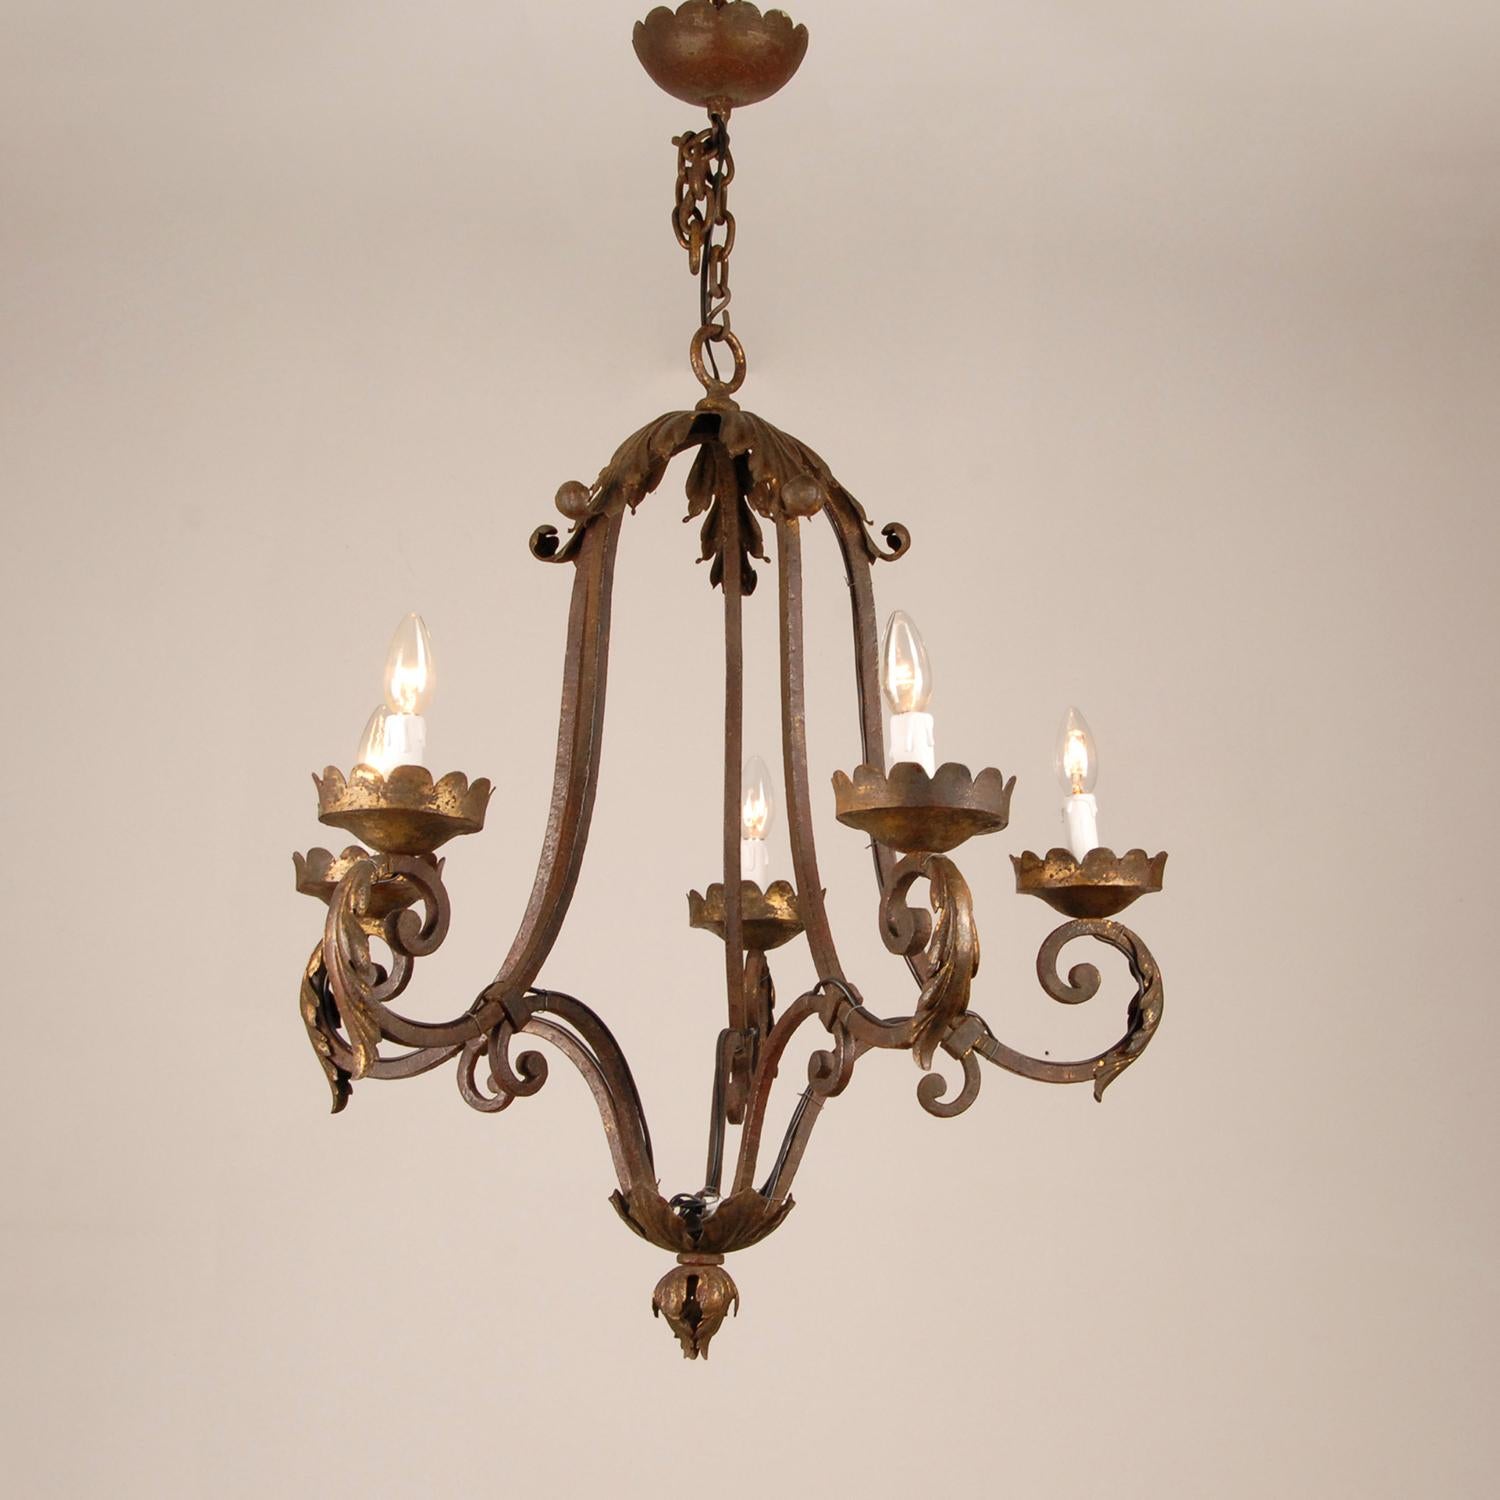 Wrought iron Art Deco cage 5 light chandelier - lantern.
Hand crafted wrought iron cage frame with 5 arms for E14 light bulbs.
On top a crown of acanthus leafs with traces of gold leaf.
The cage body has gained a very stunning time patine in the